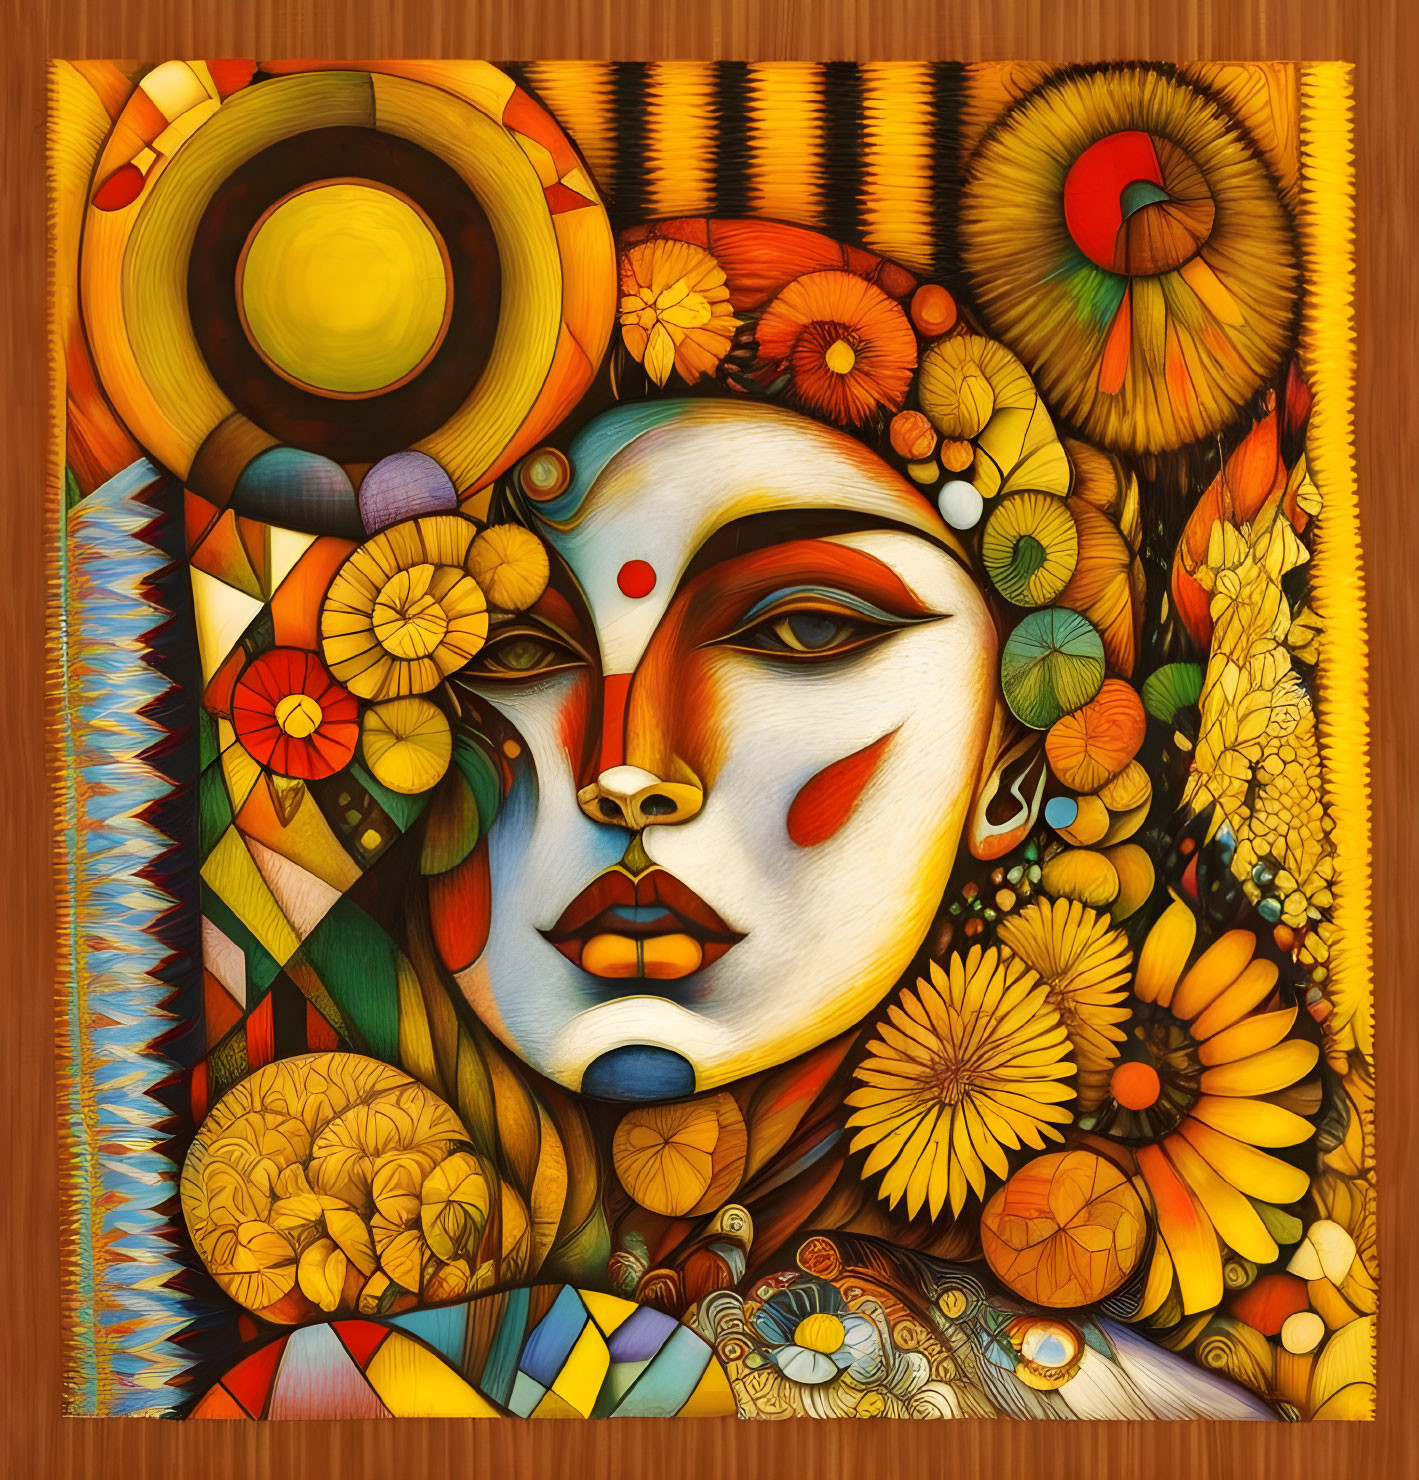 Vibrant abstract portrait of stylized female face with floral patterns